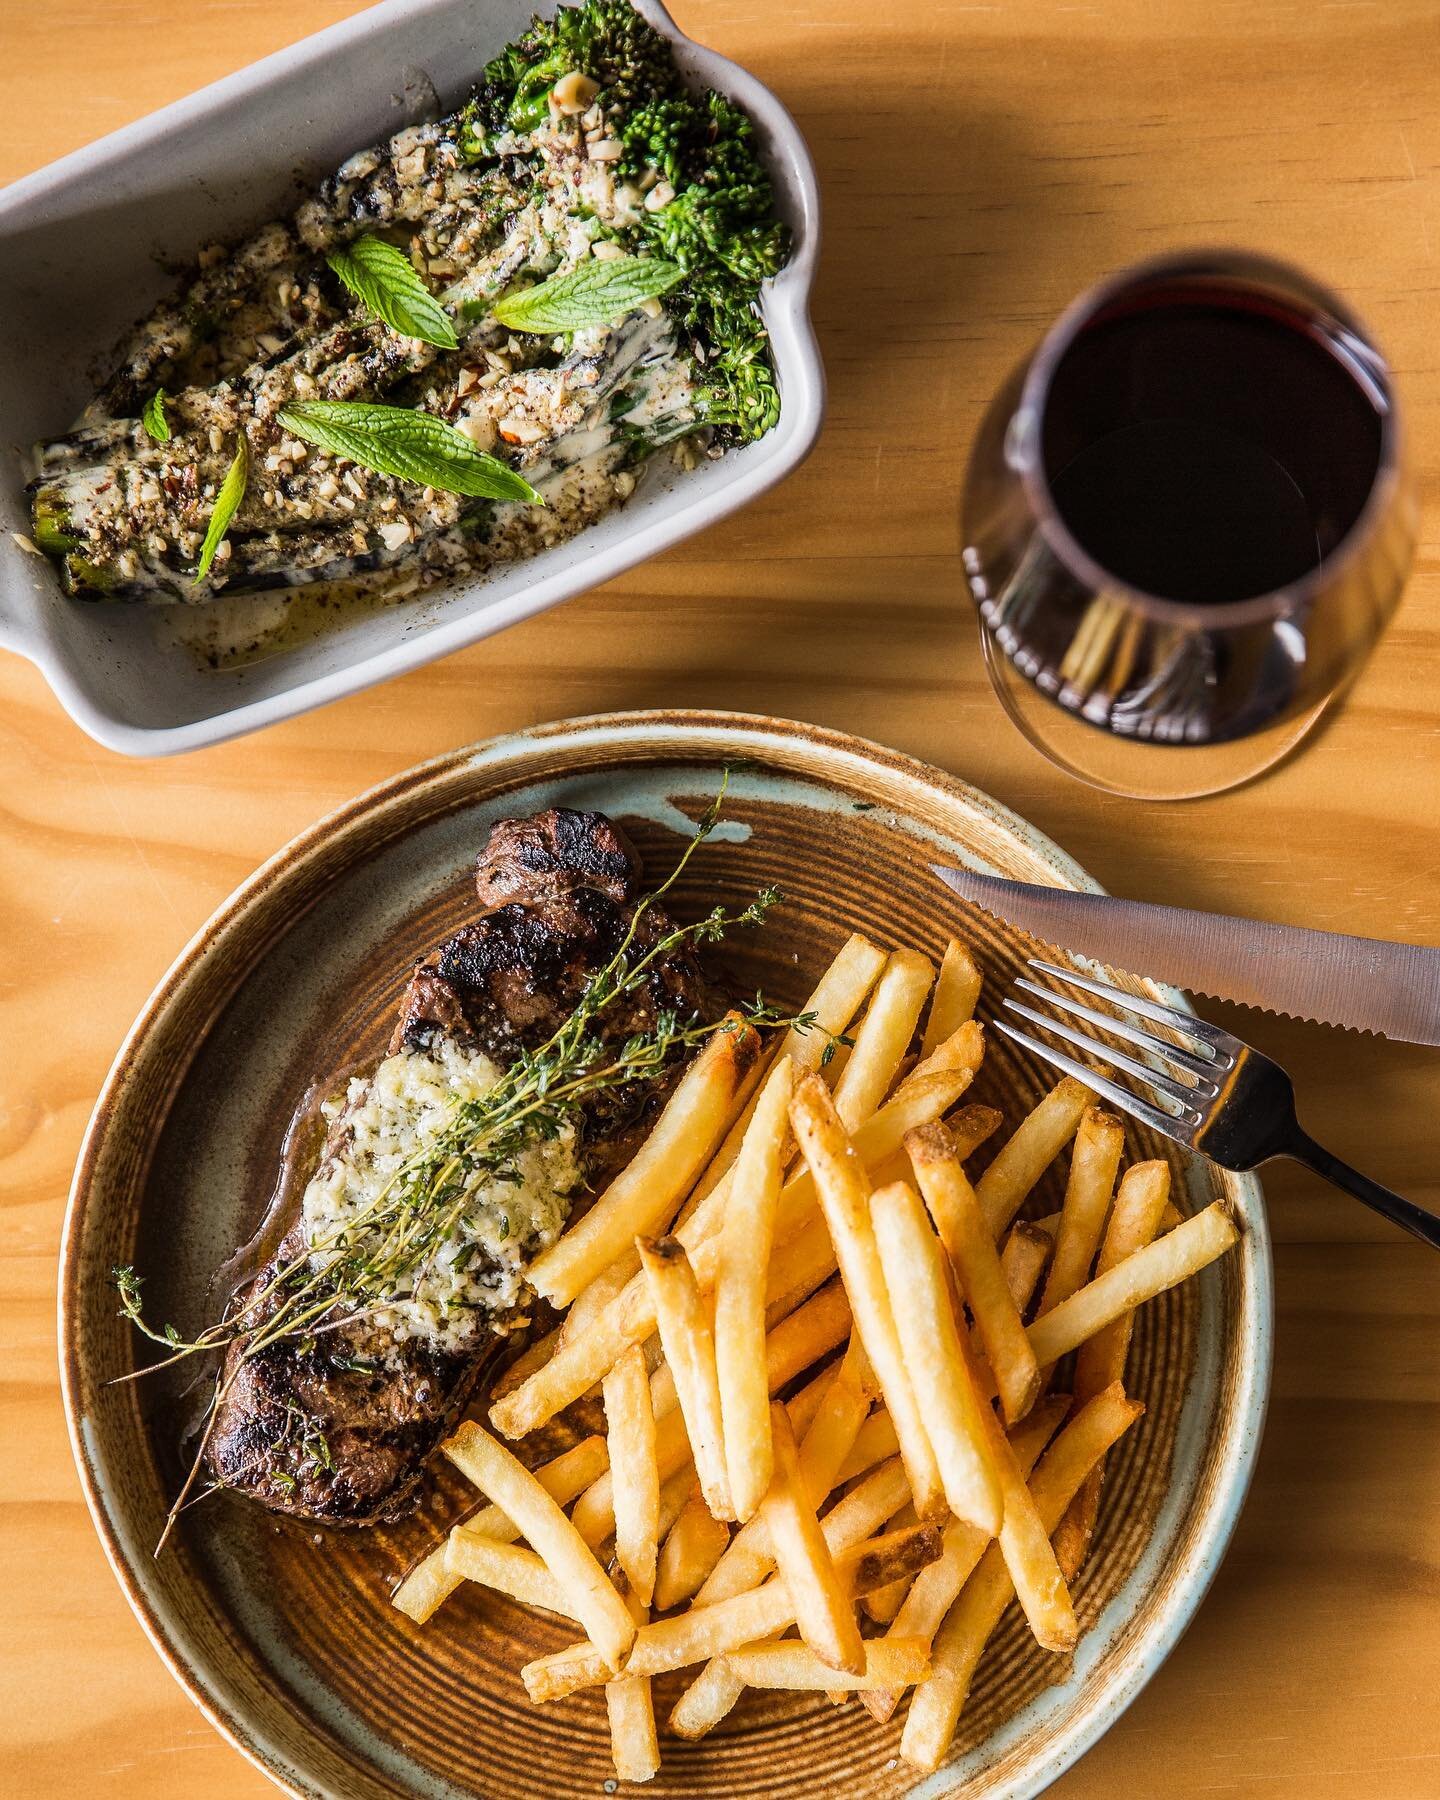 Sunday night is $25 steak night at Paddock &amp; Vine. Why not let us match it perfectly for you with a glass or two of wine?
Open from 5pm
.
.
.
#steak #yourfavouritelocal #bestvibeonthebeaches #eatlocal #dinnerisserved #lestweforget